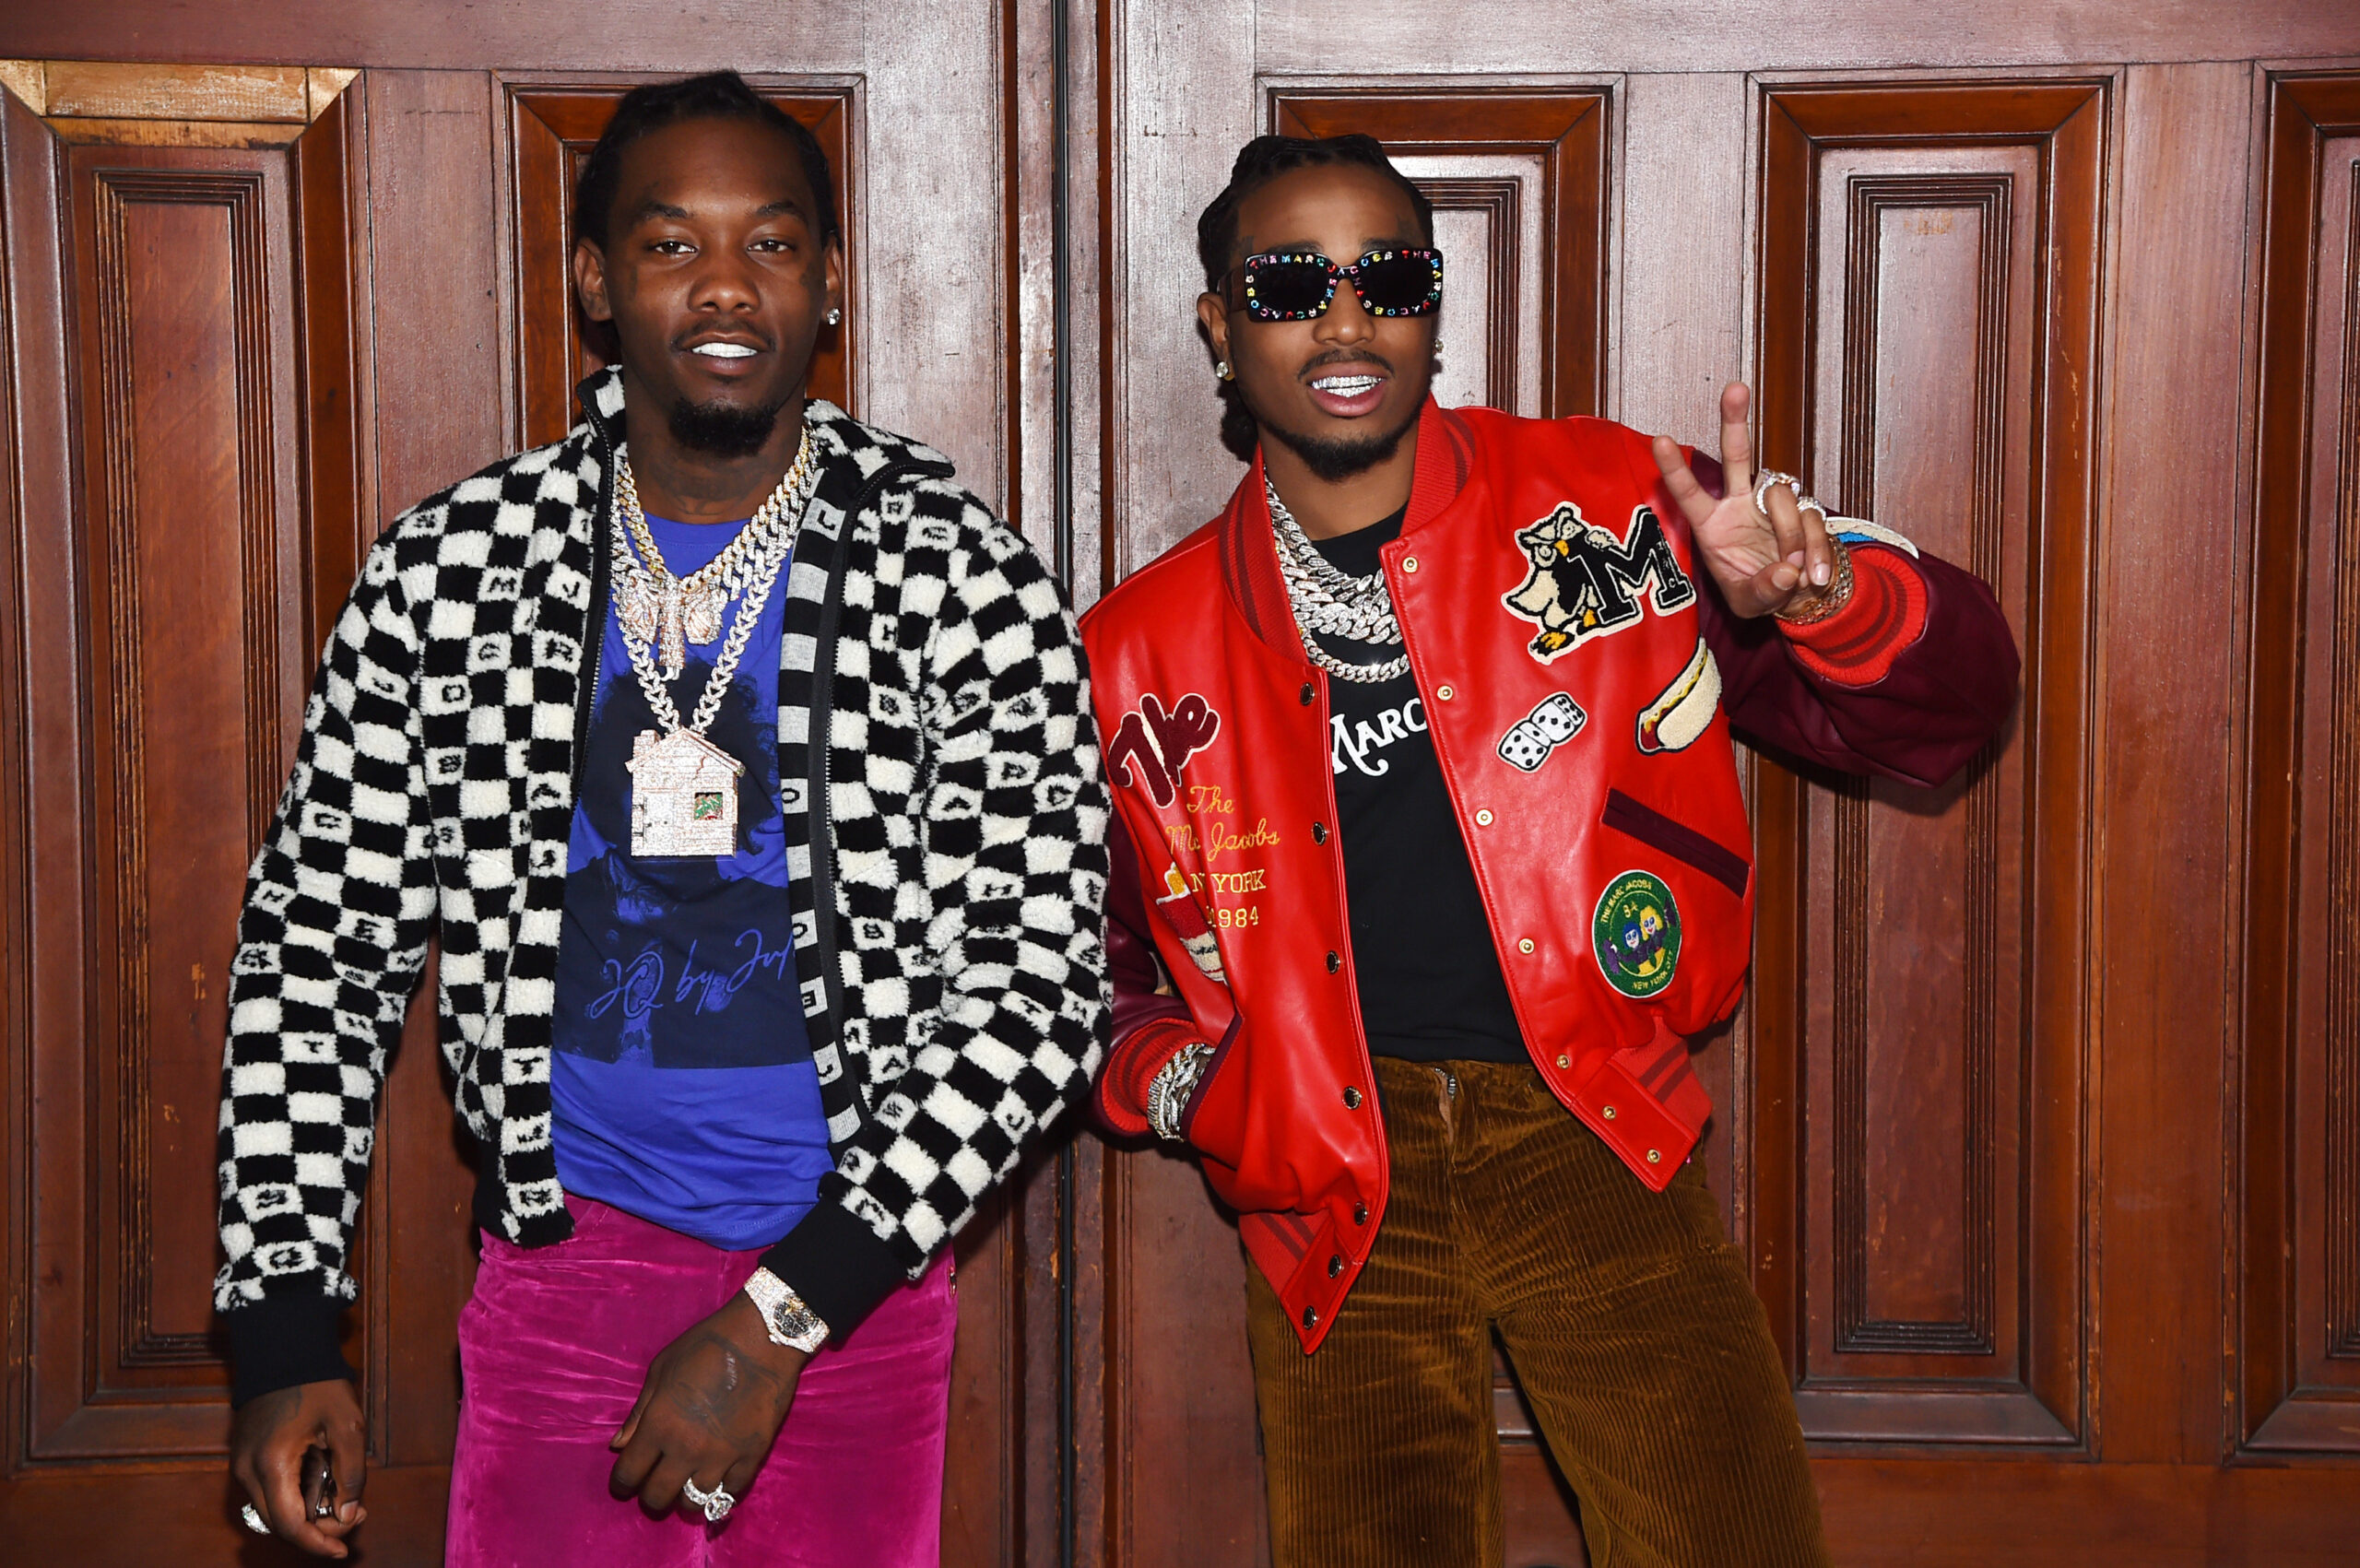 Offset On Quavo Relationship: “That’s My Brother At The End Of The Day, We Good”